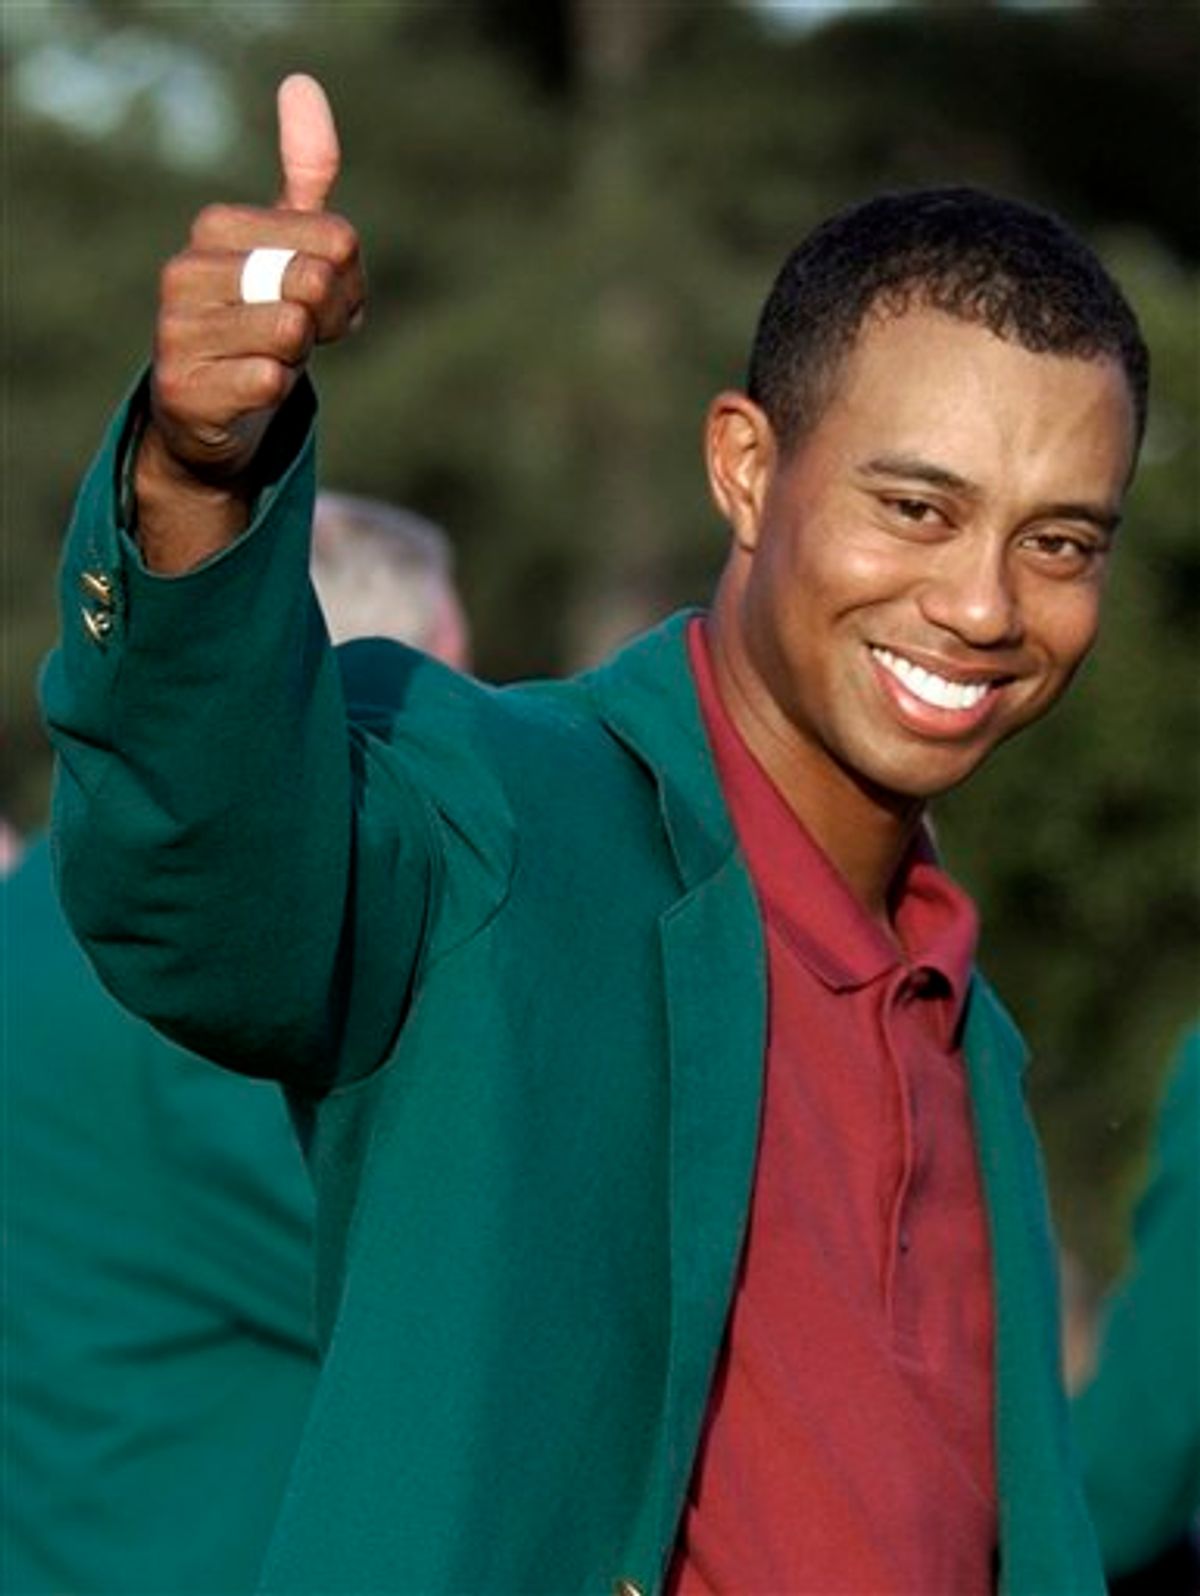 FILE - In this April 14, 2002, file photo, Tiger Woods, wearing his green jacket, gives a thumbs up as he celebrates winning the Masters golf tournament at the Augusta National Golf Club in Augusta, Ga.  In a statement Tuesday, March 16, 2010, Woods said he will play at Augusta National after a four-month hiatus because of a sex scandal. The Masters begins on April 8. (AP Photo/Elise Amendola, File) (AP)